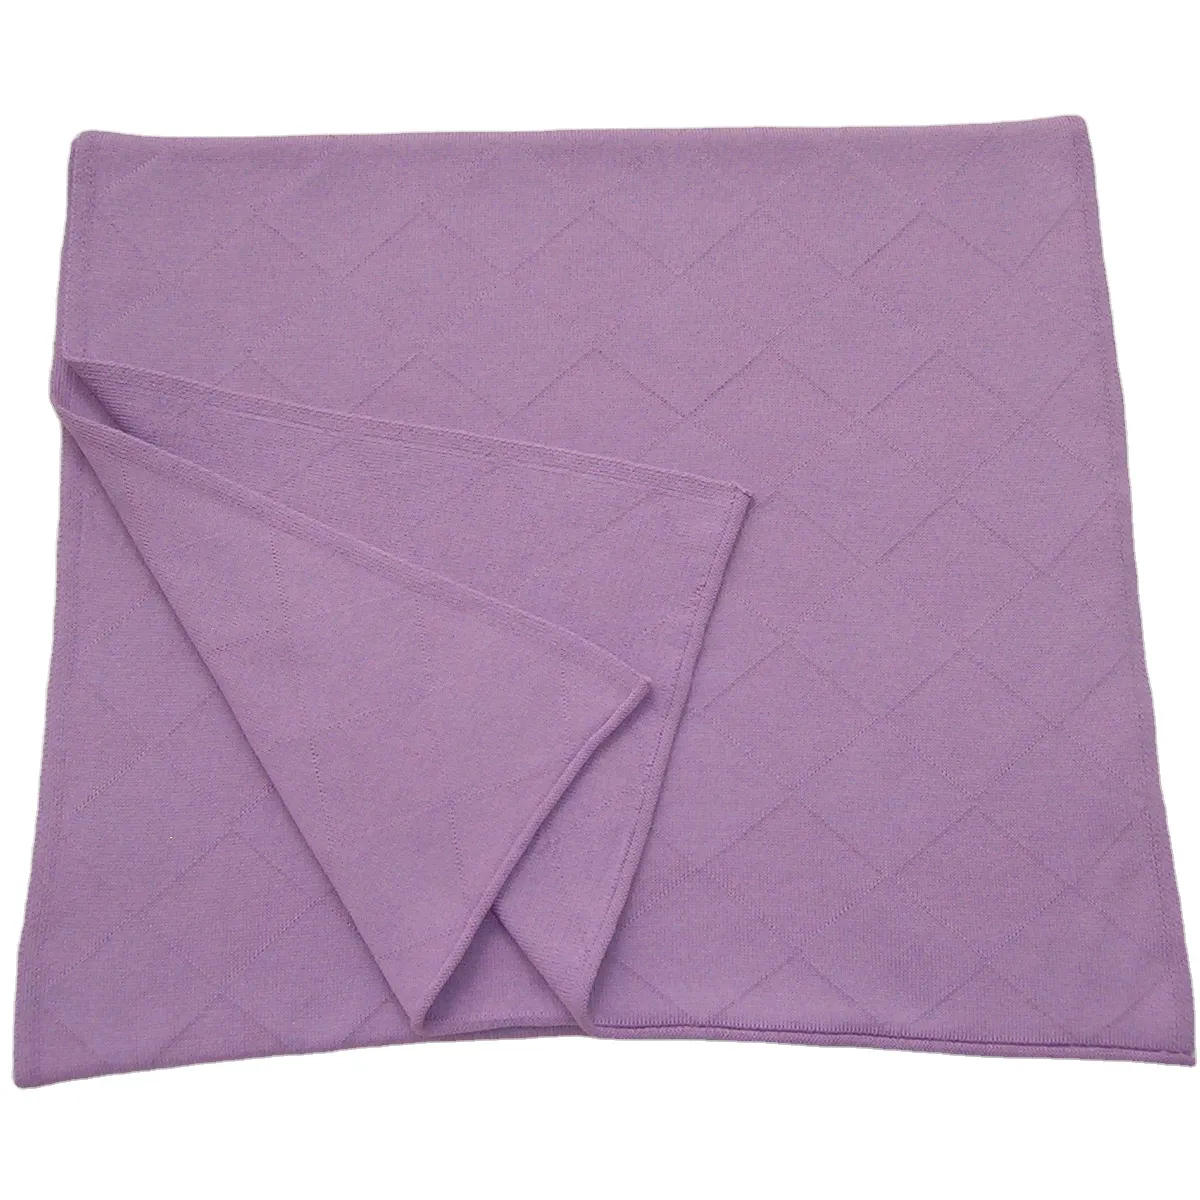 Top quality Italian knitted 100% cotton throw blankets with yarn certification for home decor